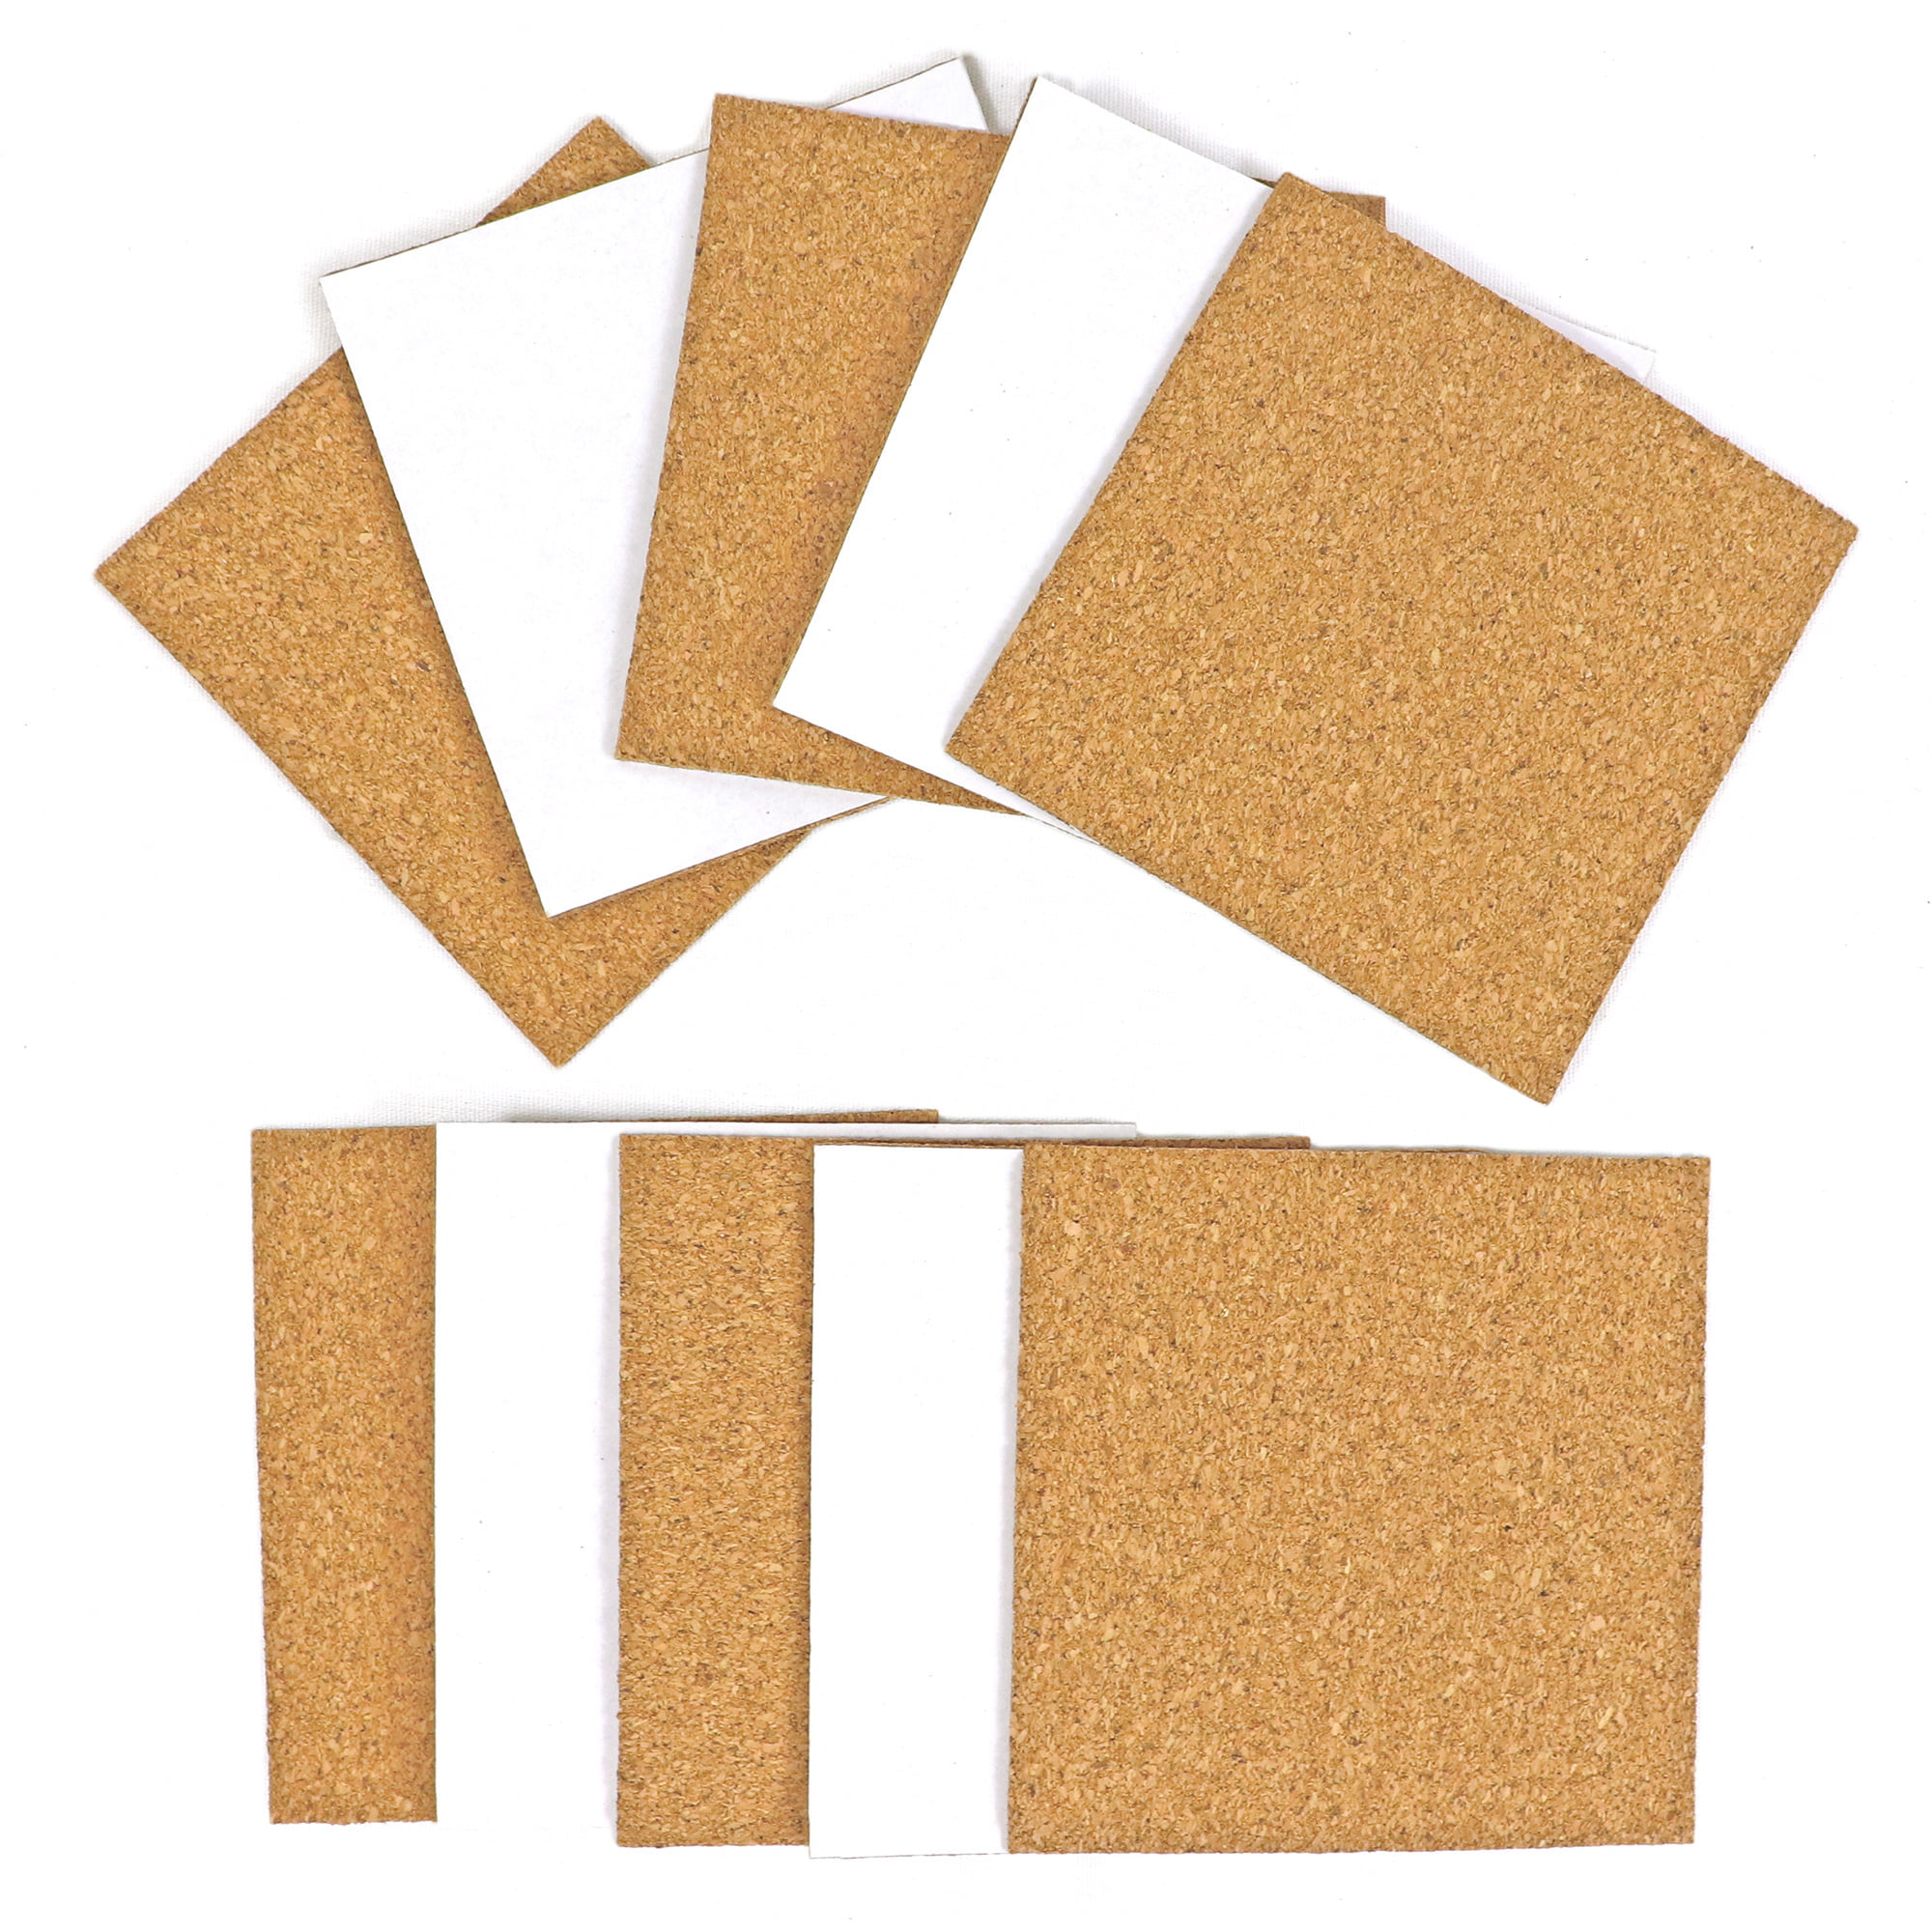 100 Pack Self-Adhesive Cork Squares 4 x 4 Inches Cork Backing Sheets Cork  Tiles for Cork Coasters and DIY Crafts 